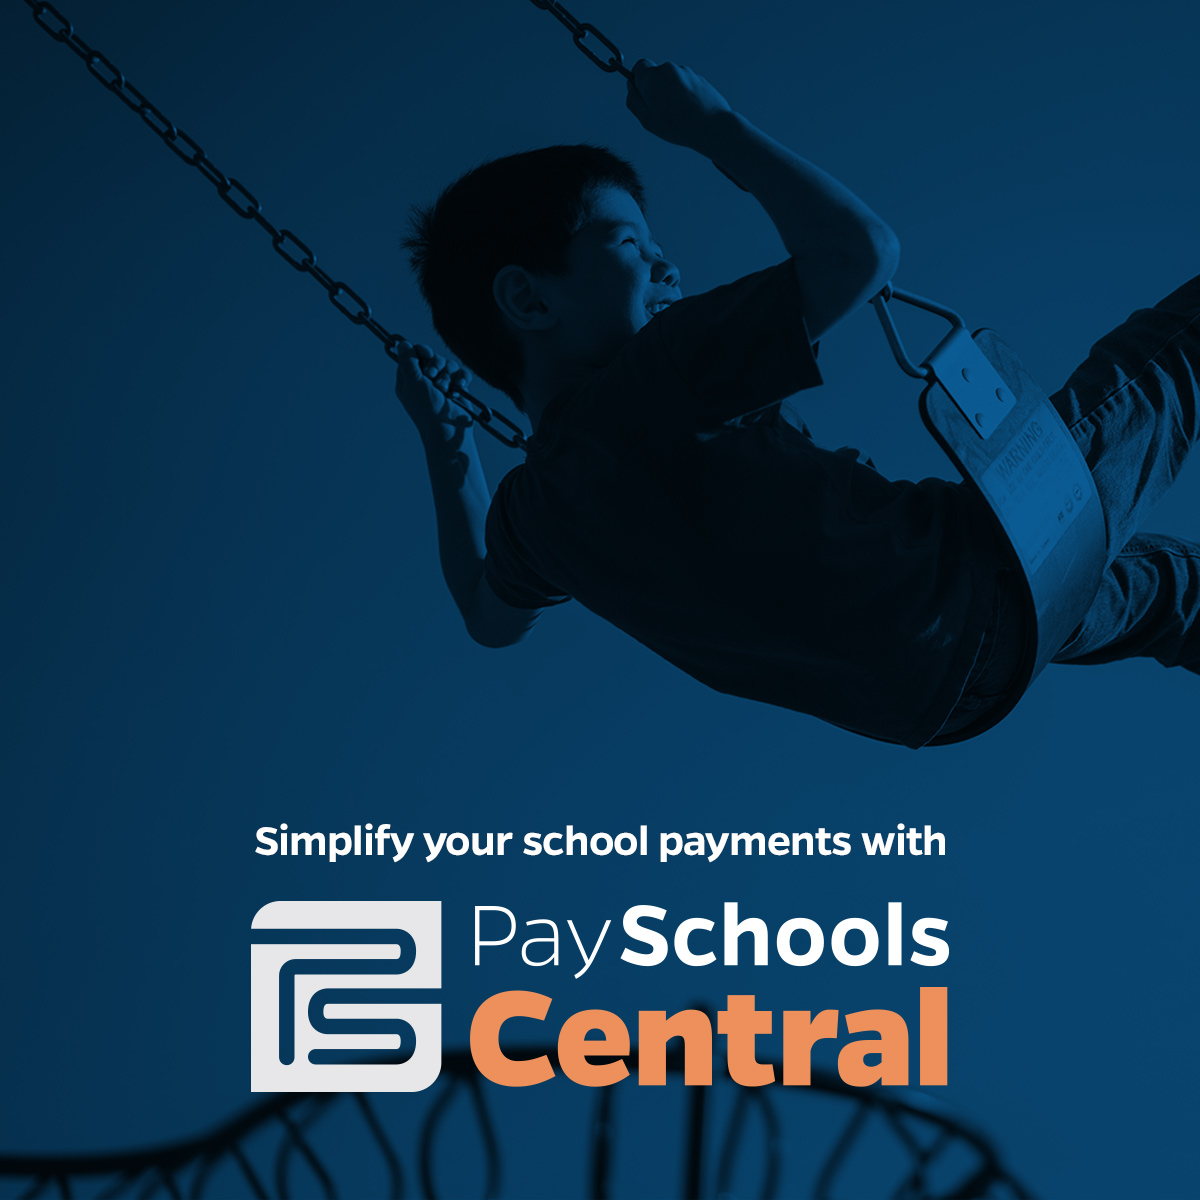 Simplify school payments with Payschools central